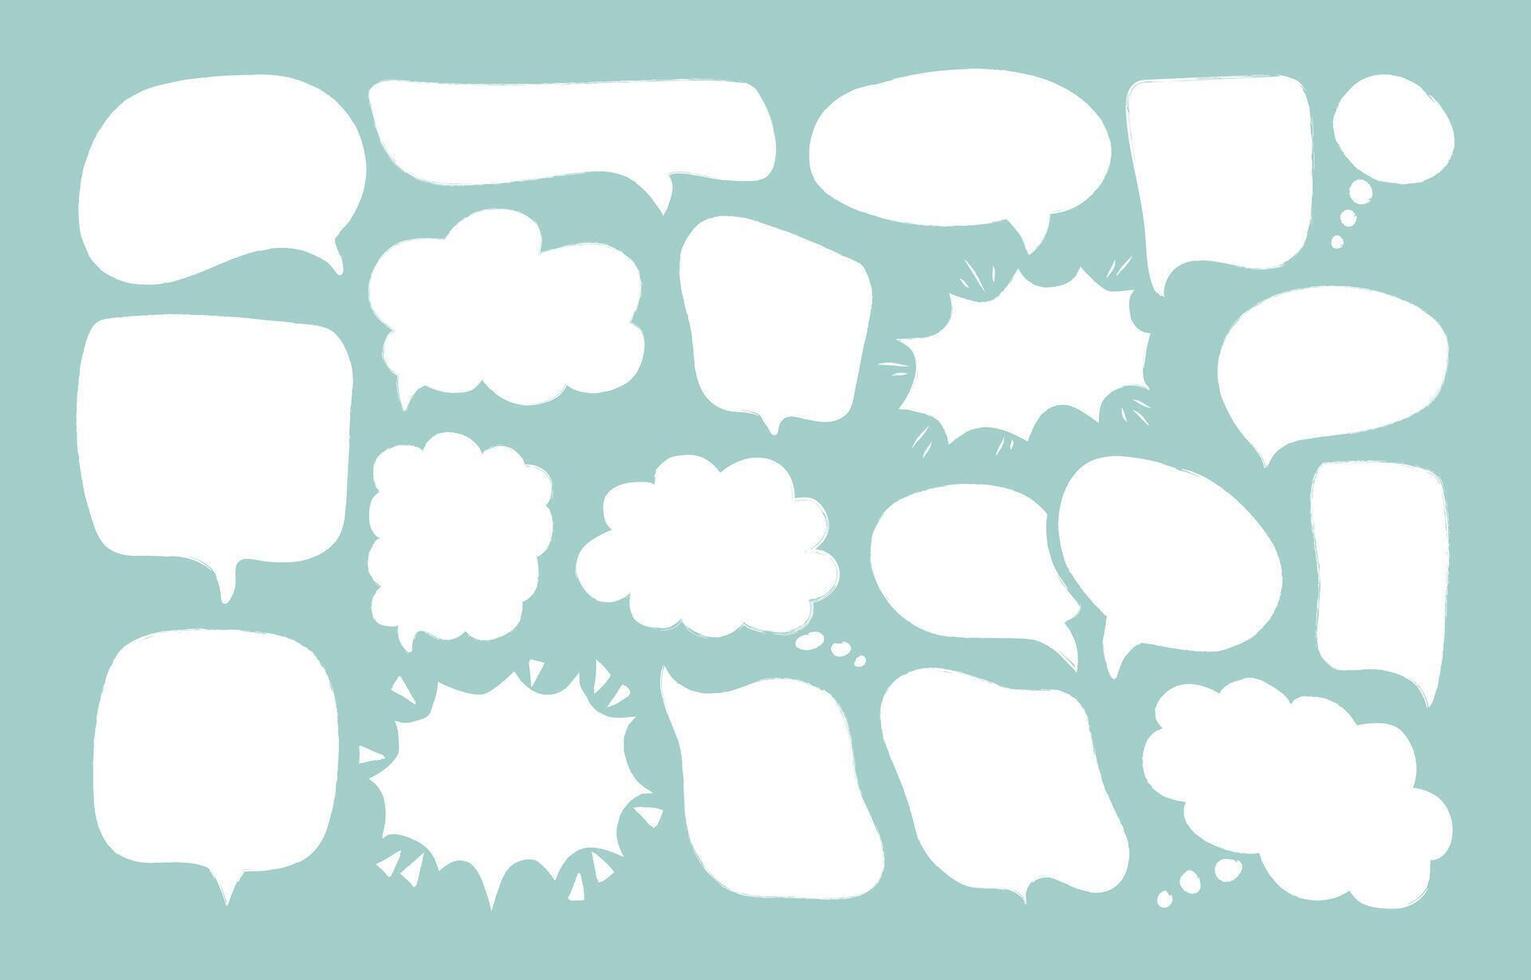 Set white speech bubbles isolated on blue background. Hand drawn different doodle talk balloons with grunge crayon texture. Empty thought and text clouds. Chat communication sign. vector